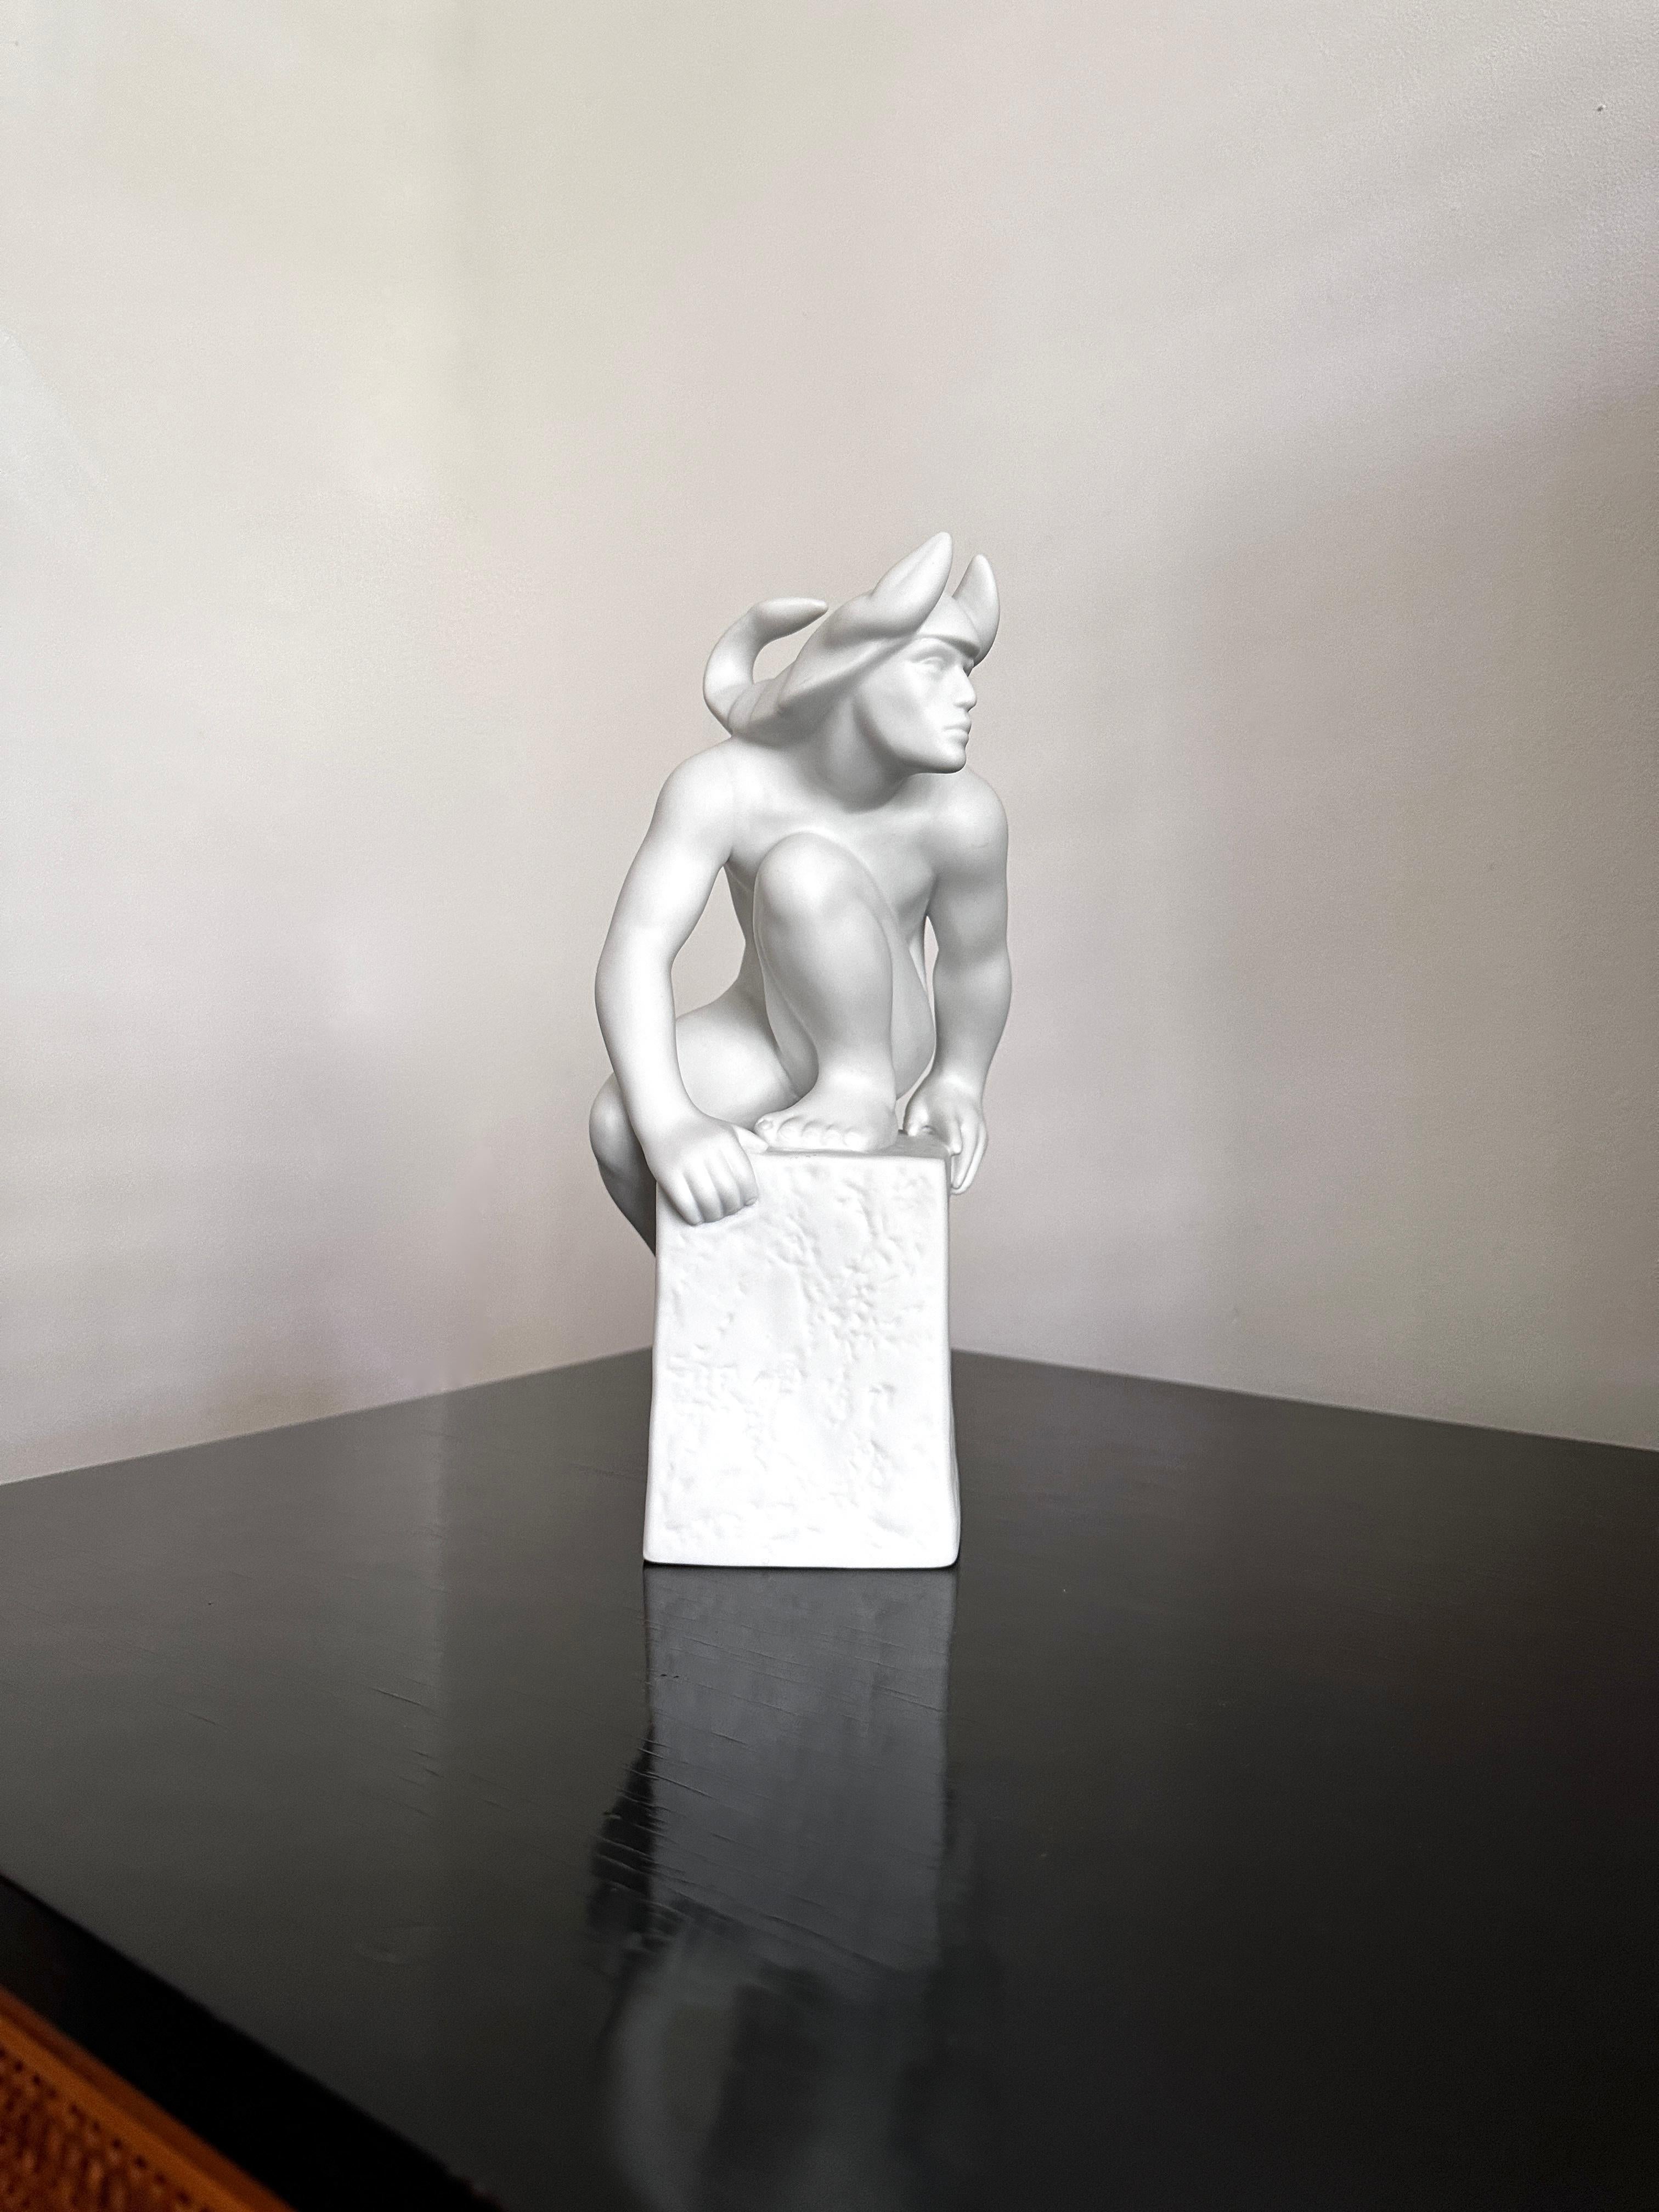 Beautiful bisque, matte white, statue of a man designed by Pia Langelund for Royal Copenhagen. The statue is one of the zodiac figures and this statue represents Scorpio. Designed probably sometime in the 1990's and has been discontinued. The